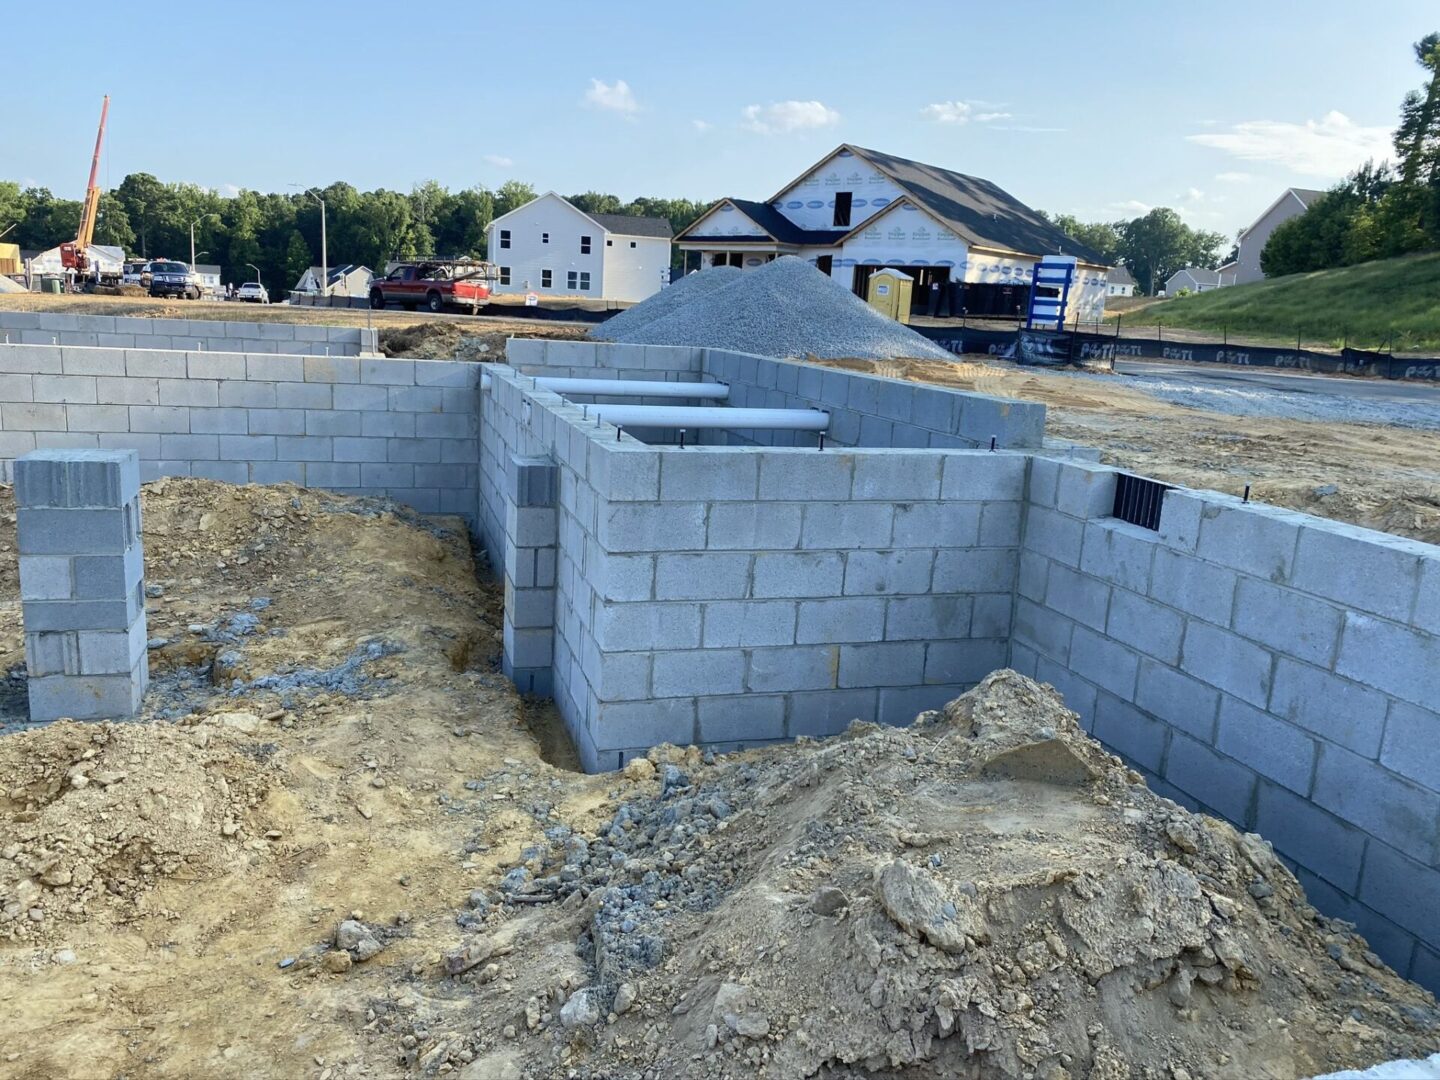 A building site with concrete blocks and a hole in the ground.